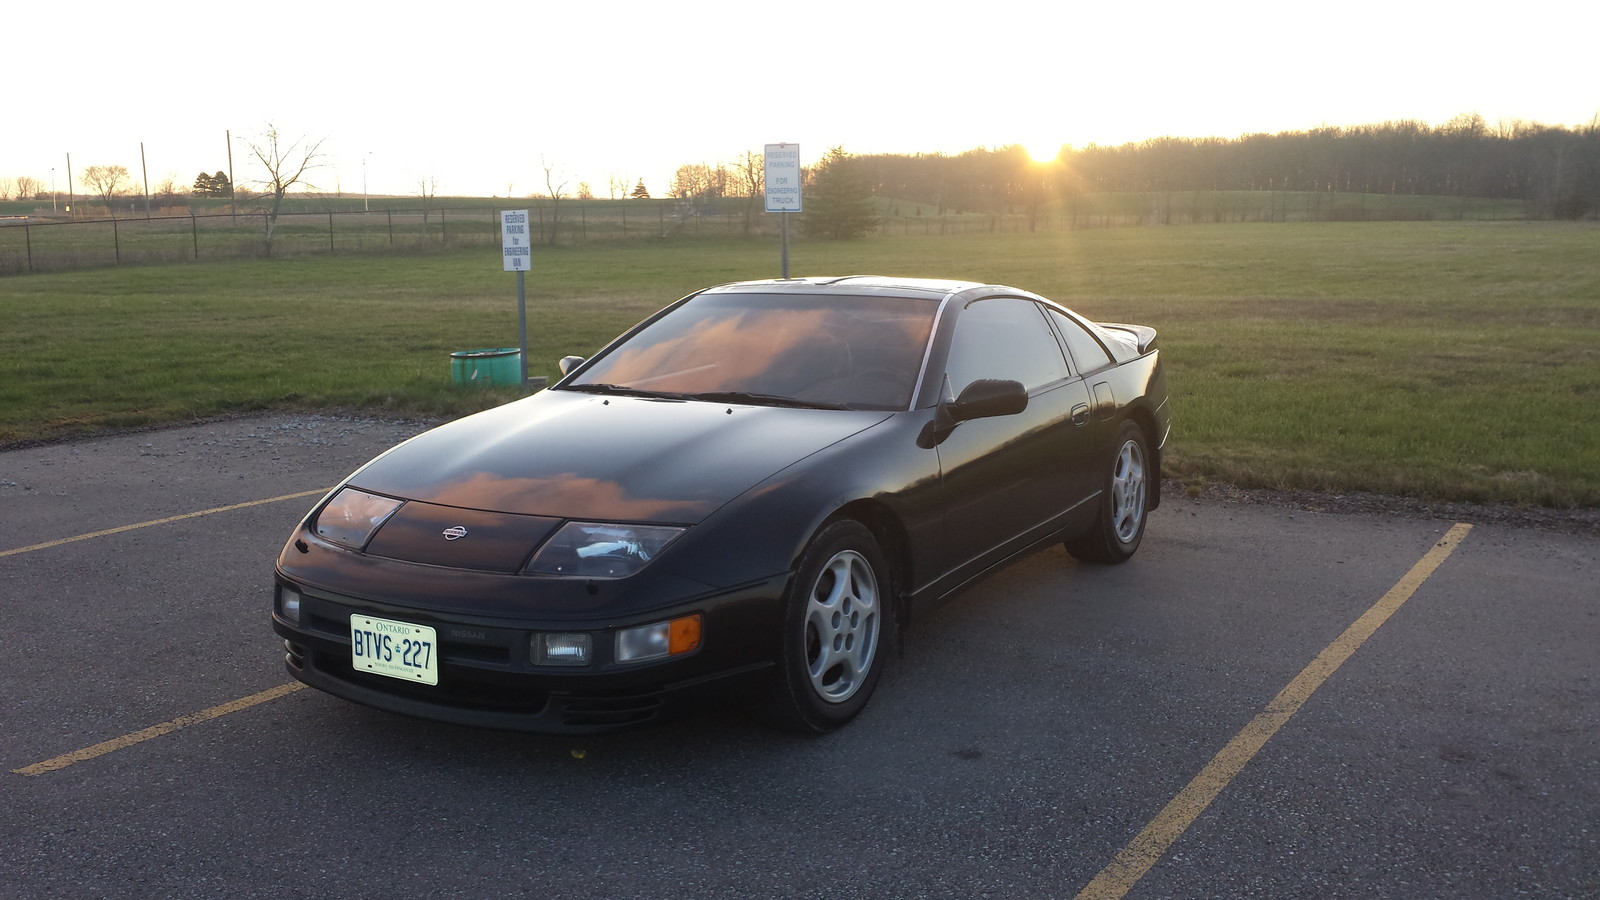 Nissan 300zx twin turbo 0-60 time